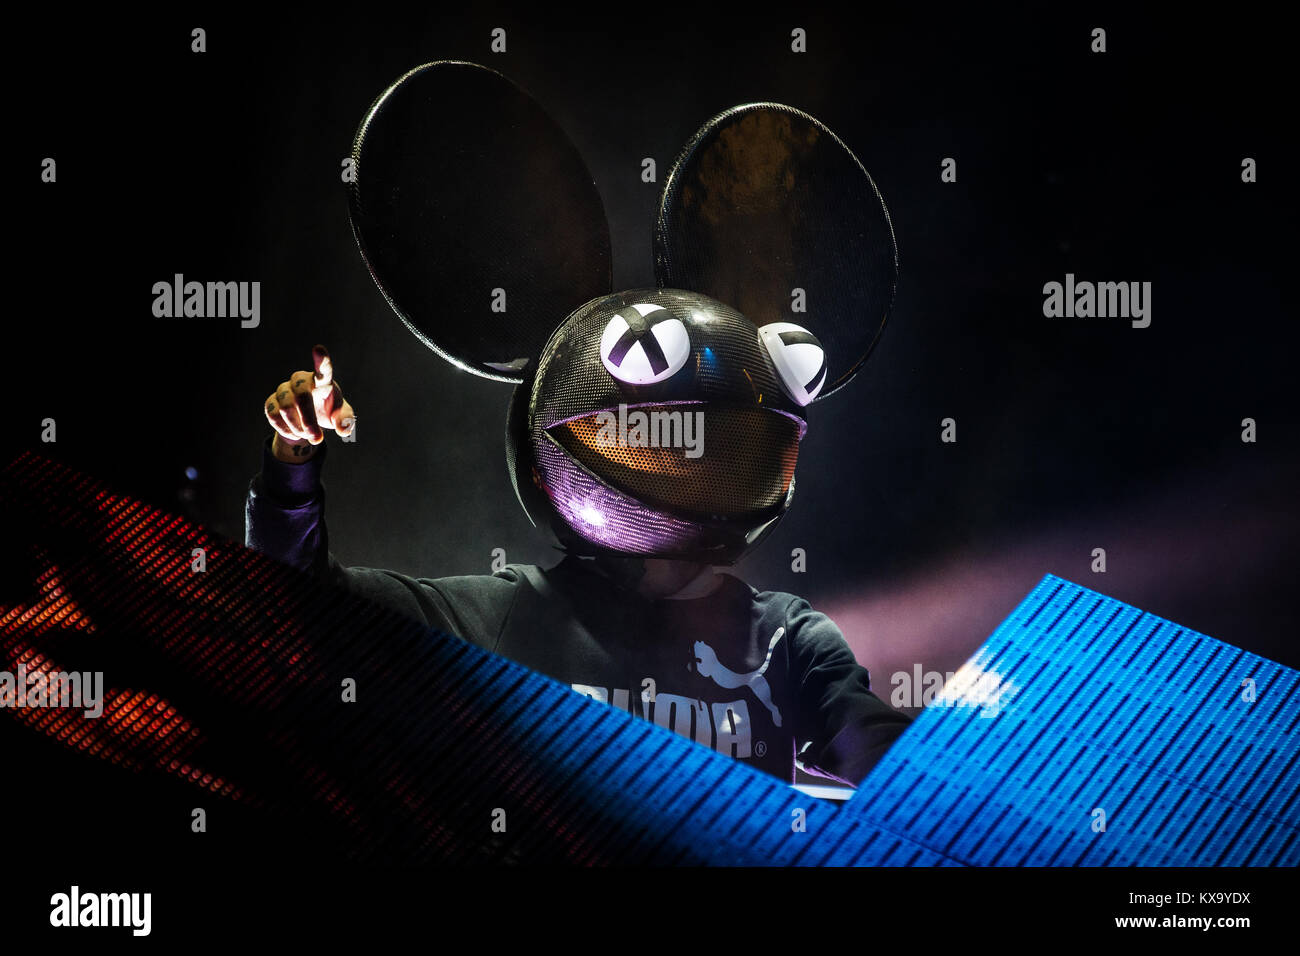 Deadmau5 Mask High Resolution Stock Photography And Images Alamy